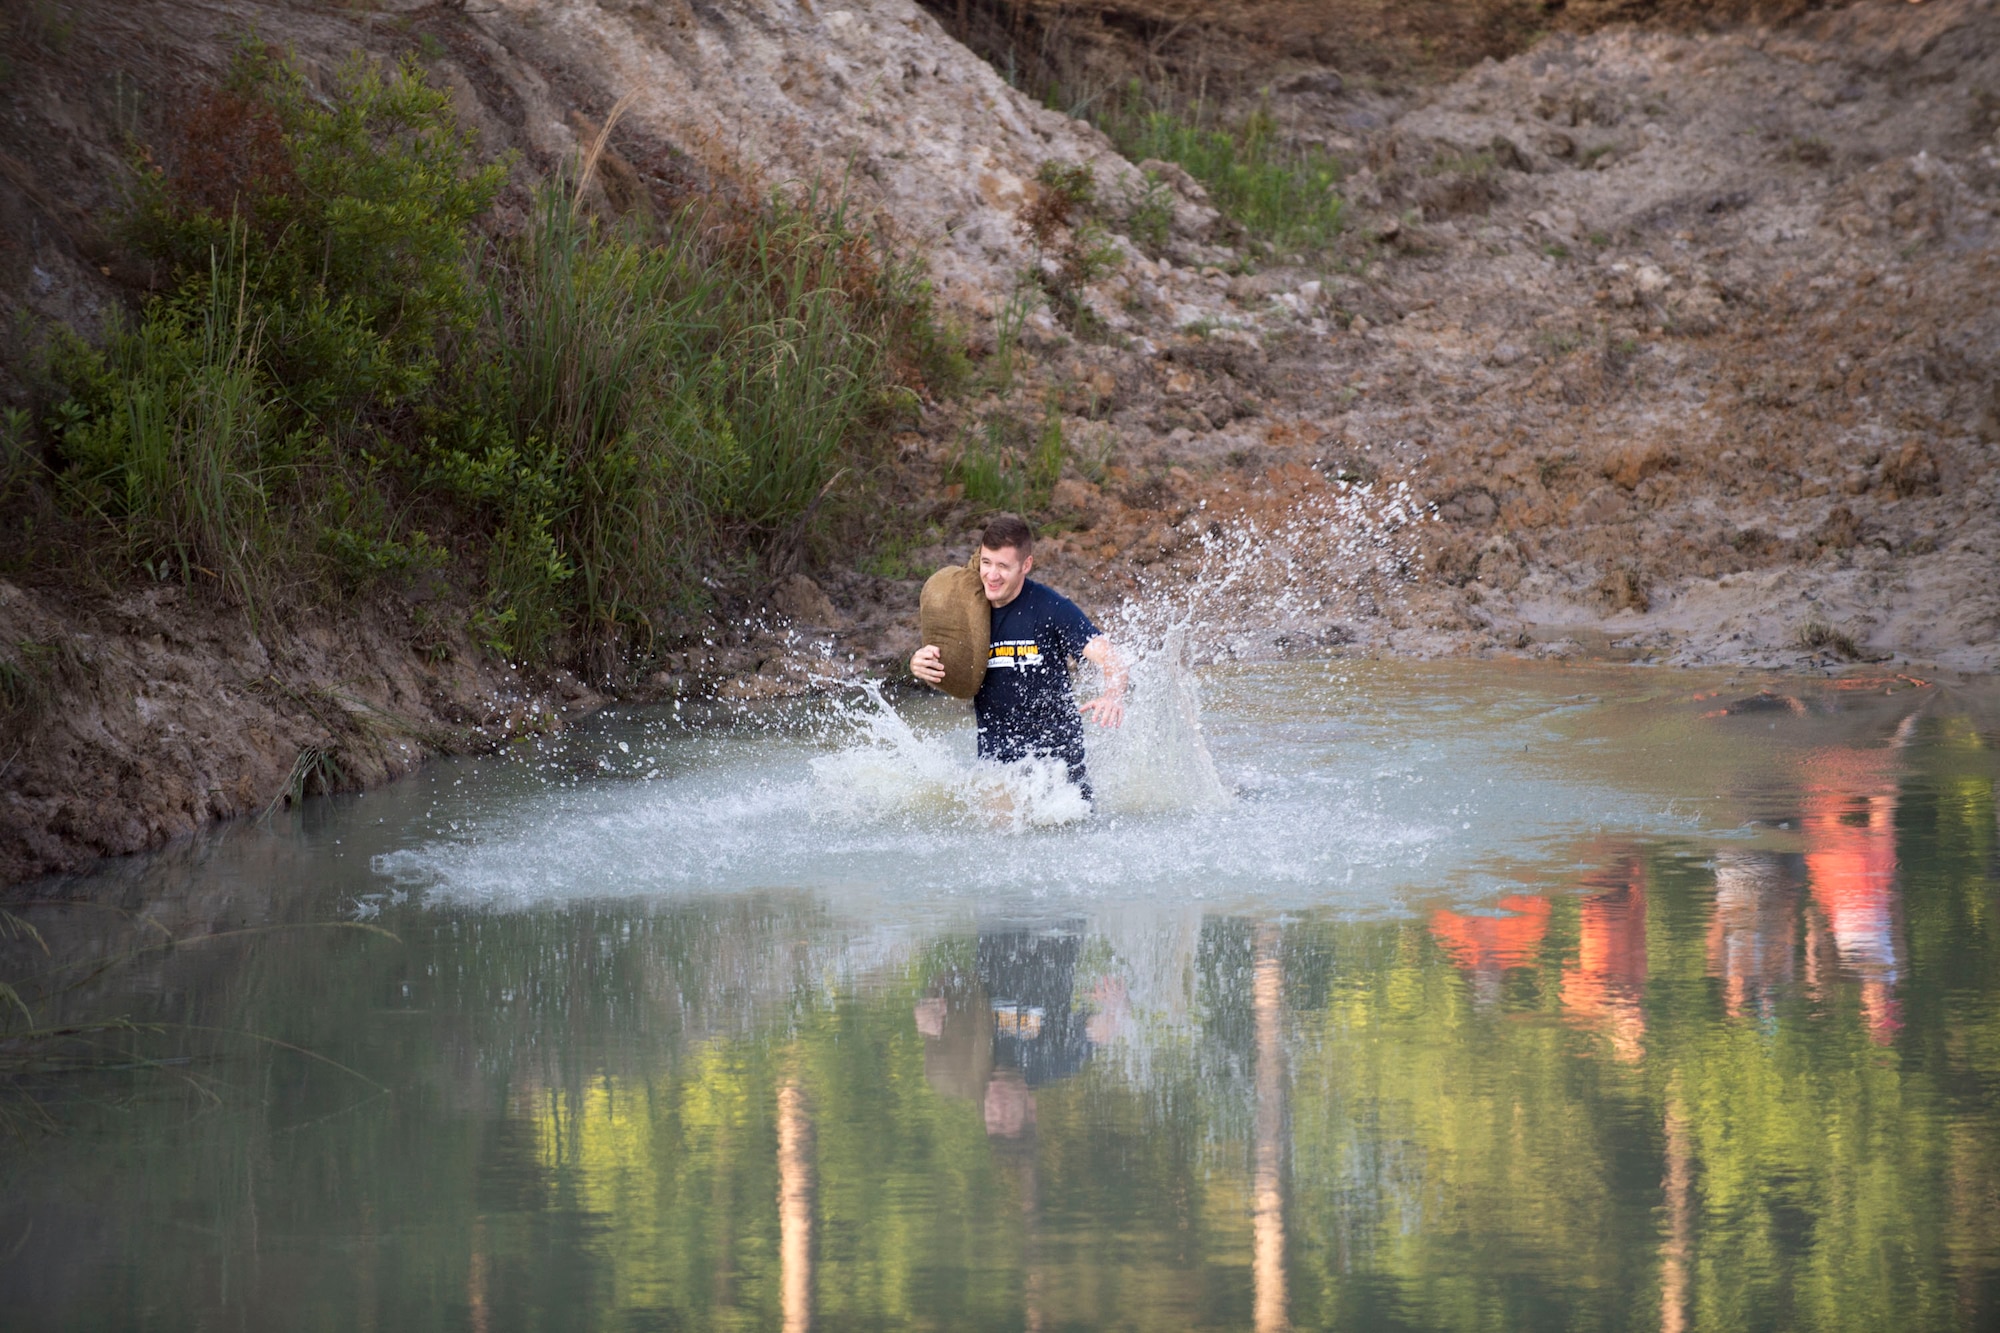 A participant begins the annual Moody Mud Run, May 6, 2017, in Ray City, Ga. The Fourth Annual Moody Mud consisted of both adult and child course that challenged more than 600 participants with obstacles over 4.2 miles. (U.S. Air Force photo by Airman 1st Class Daniel Snider)